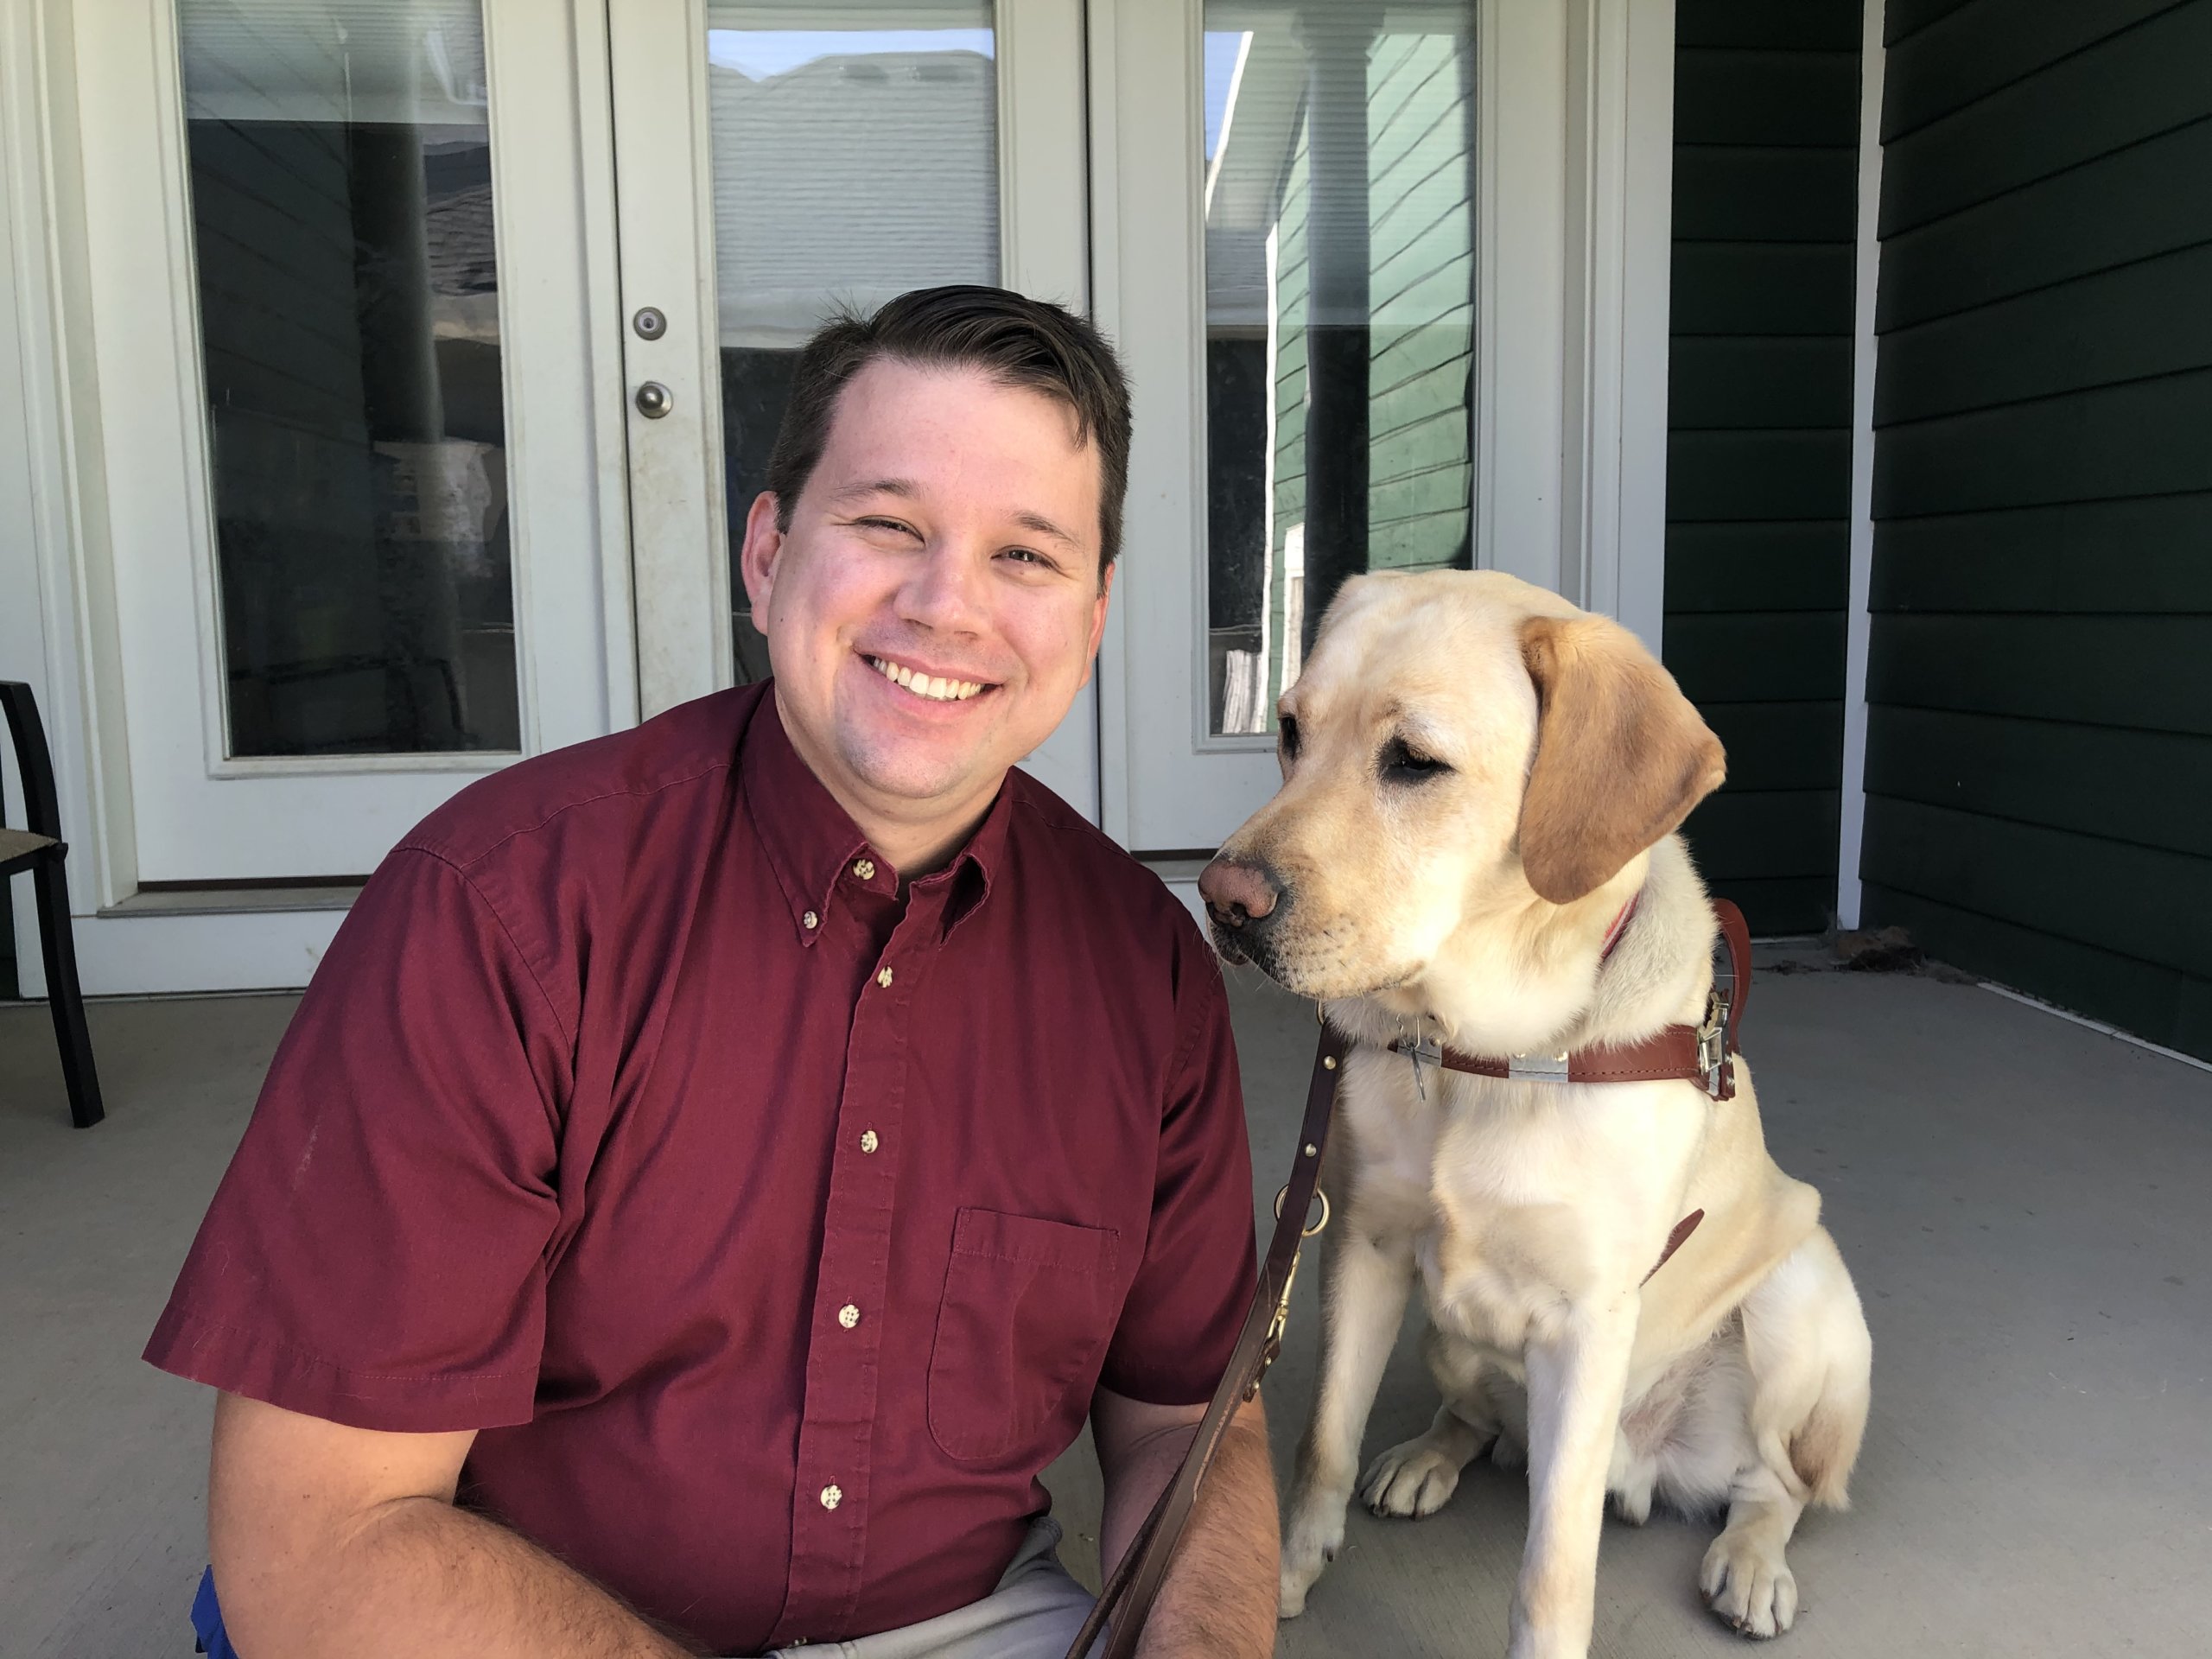 Graduate Ryan and guide dog Levi take a break from training